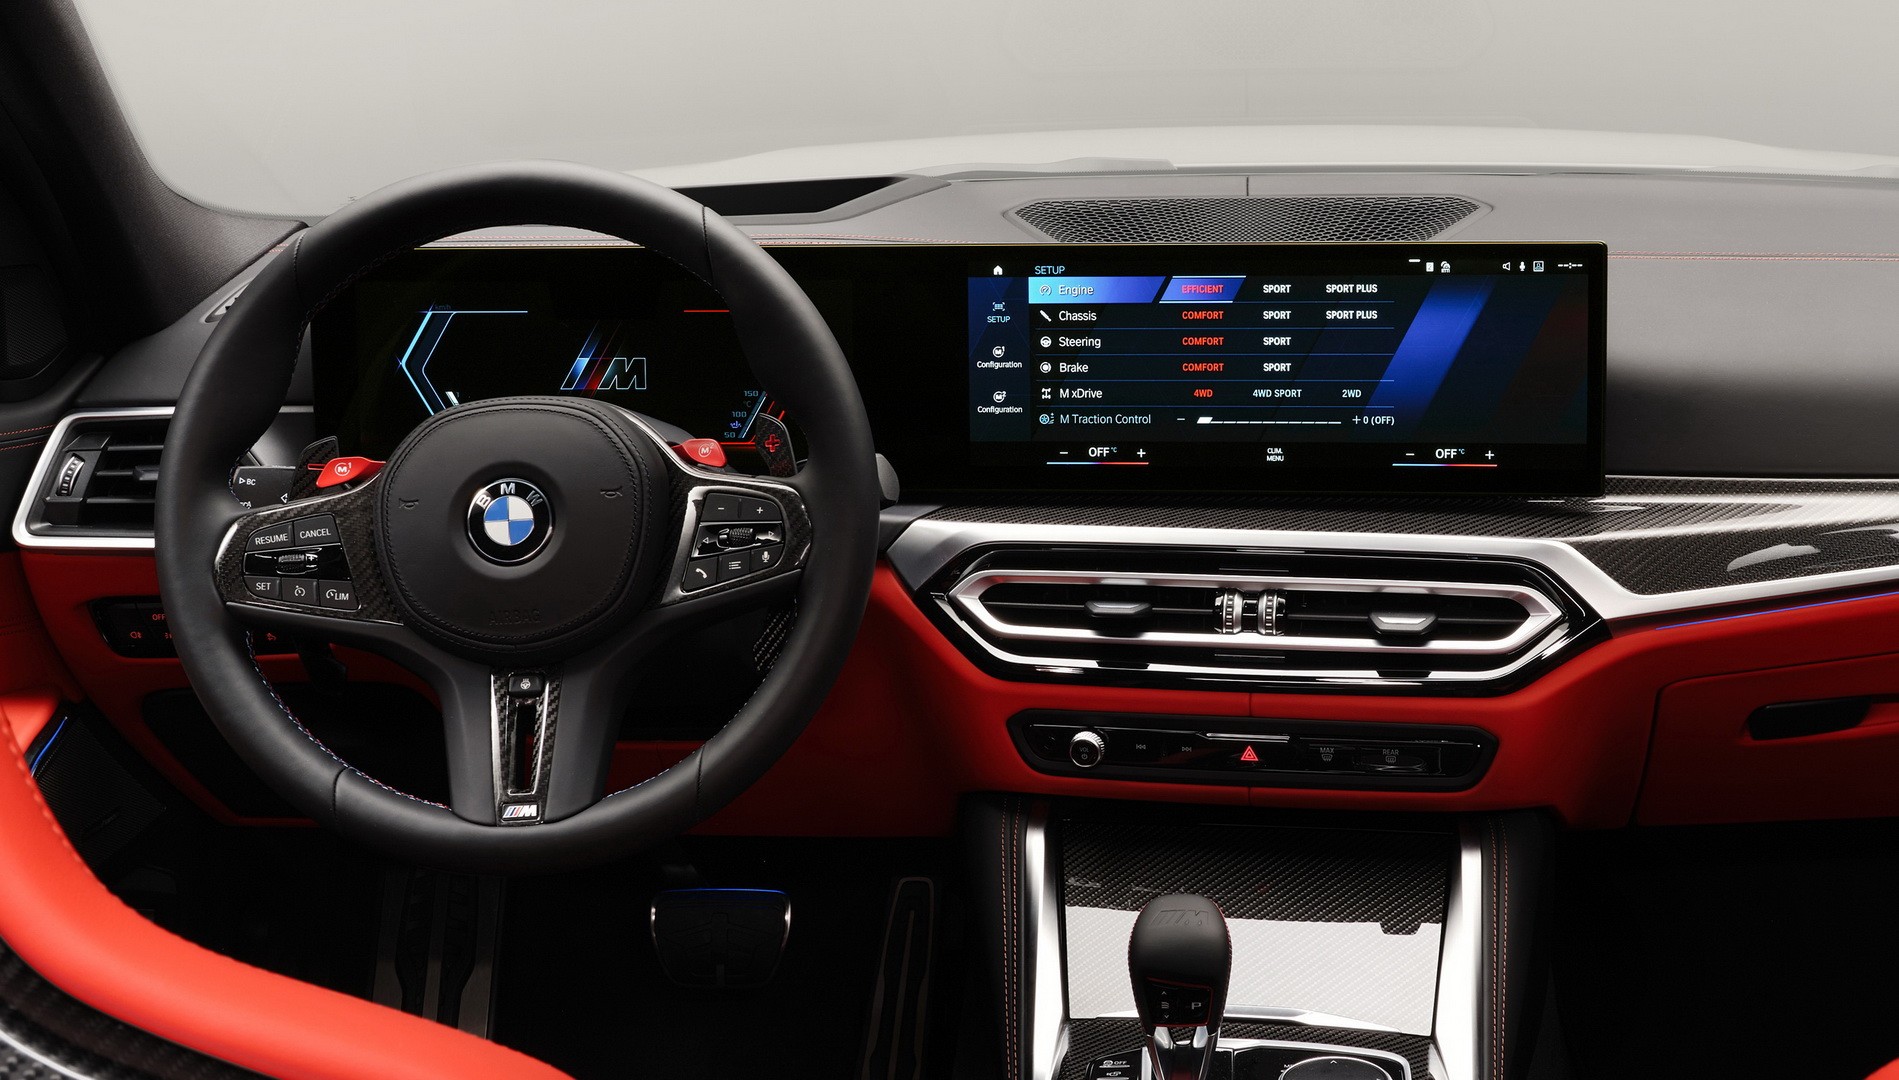 2023 Bmw M3 Lci Interior Revealed Boasts Curved Display And Latest Gen